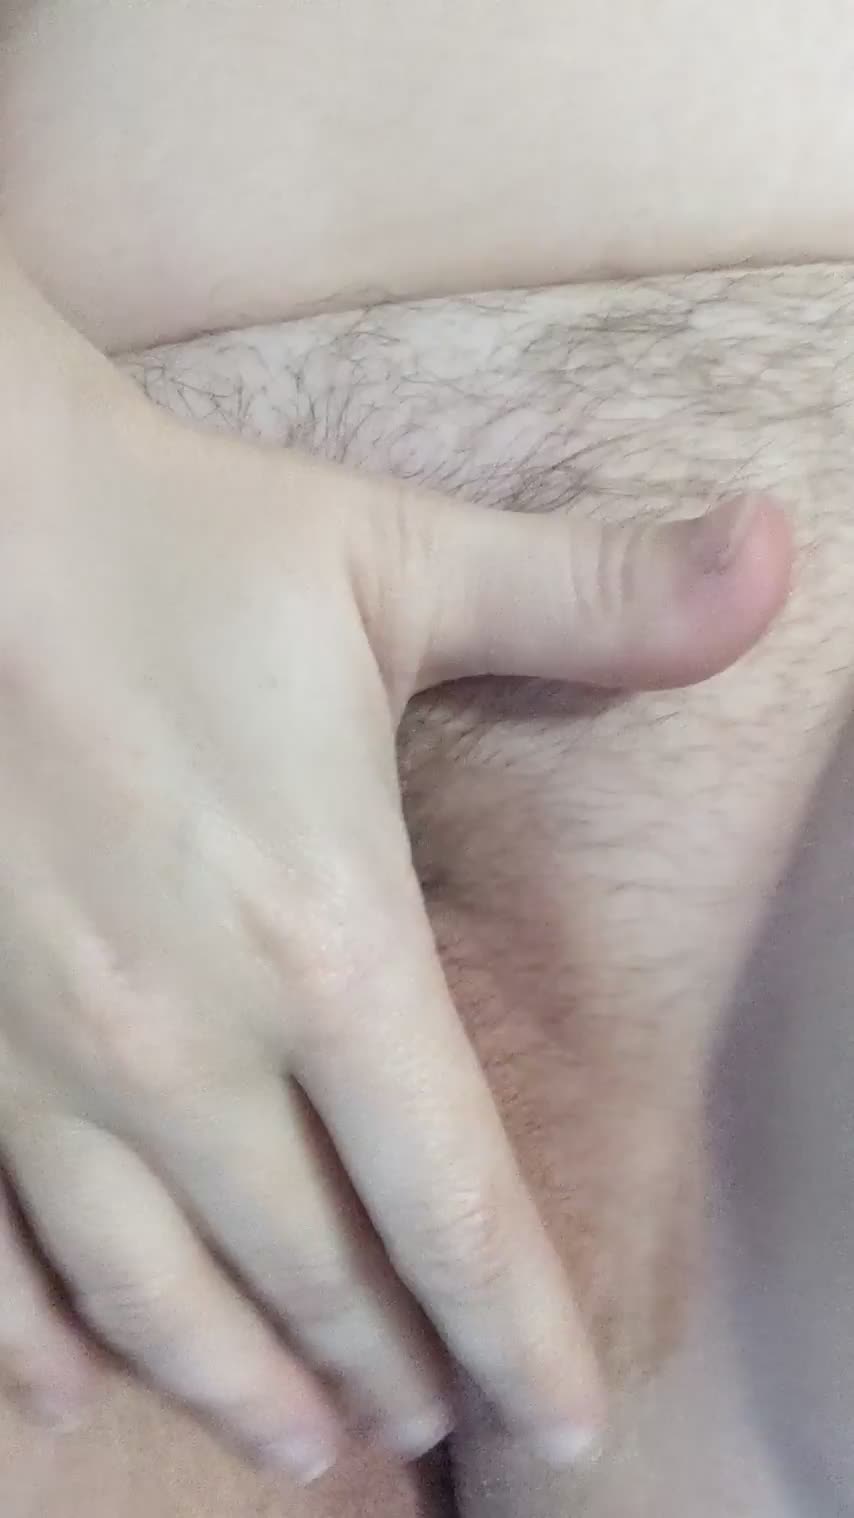 Trying to tease and edge all day, while also getting housework done. I've cum too much recently, I need to be a good girl today 😌 : video clip